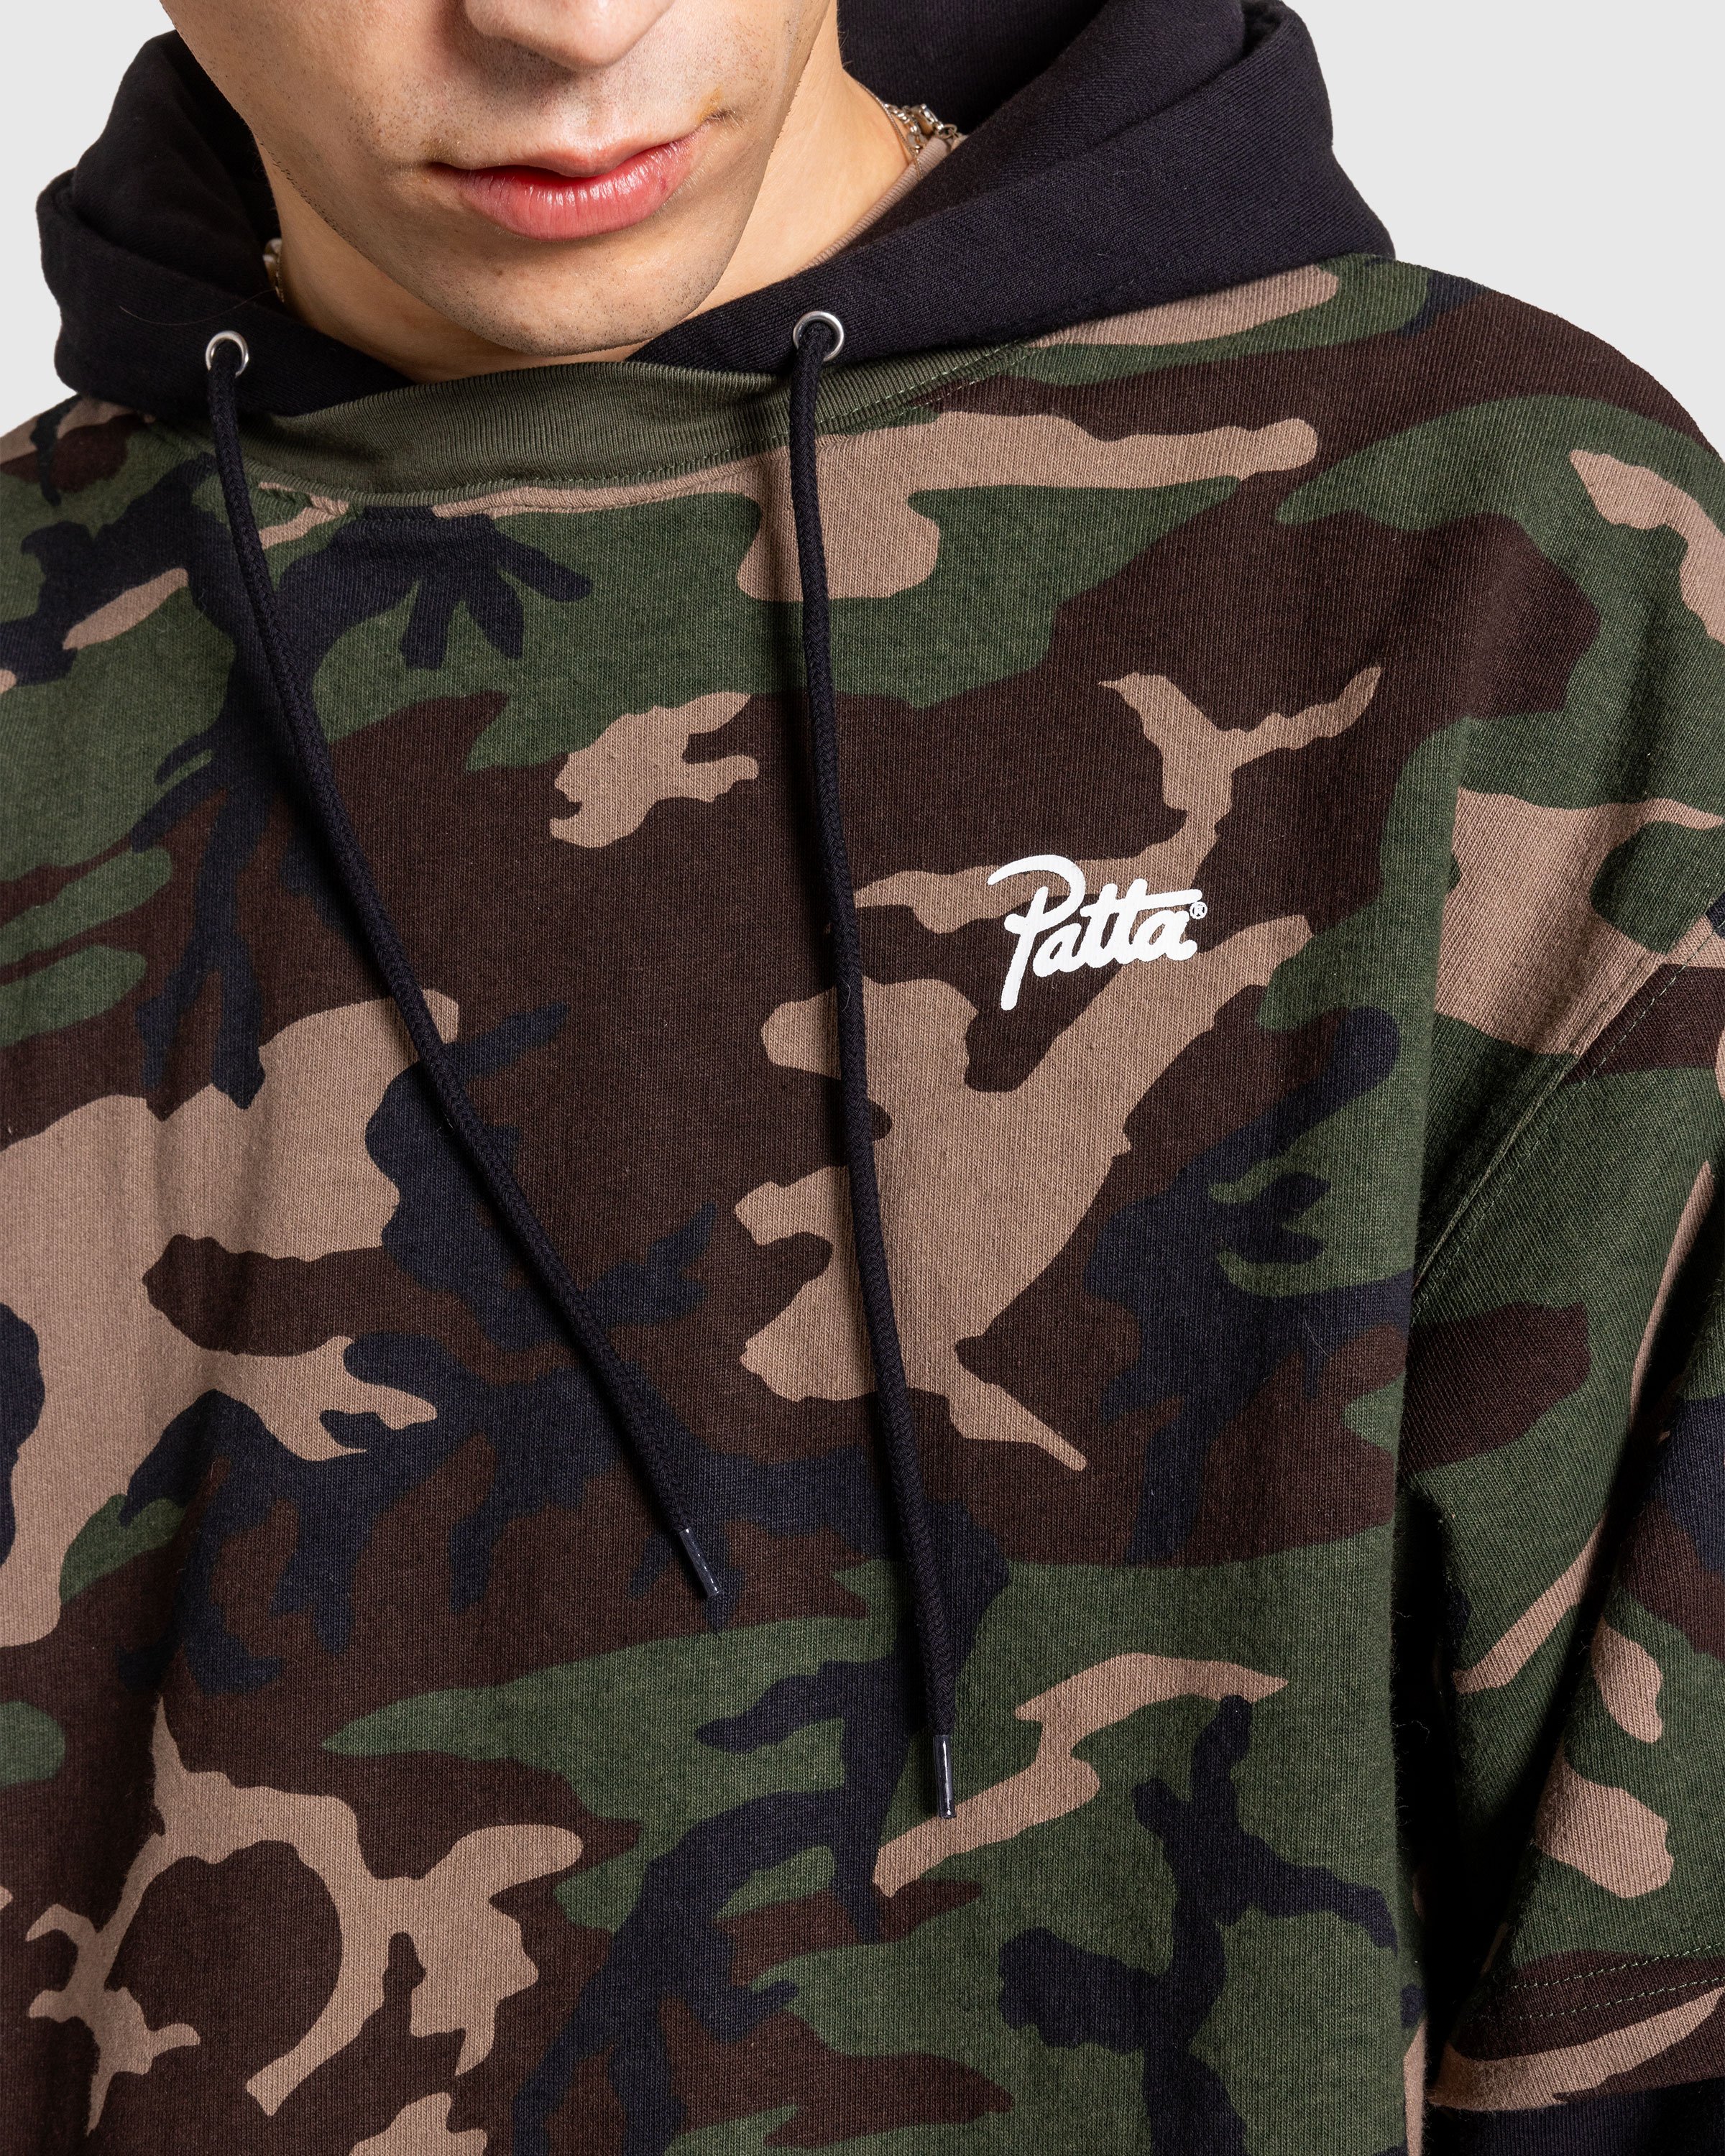 Patta - Always On Top Hooded Sweater Multi - Clothing - Multi - Image 5